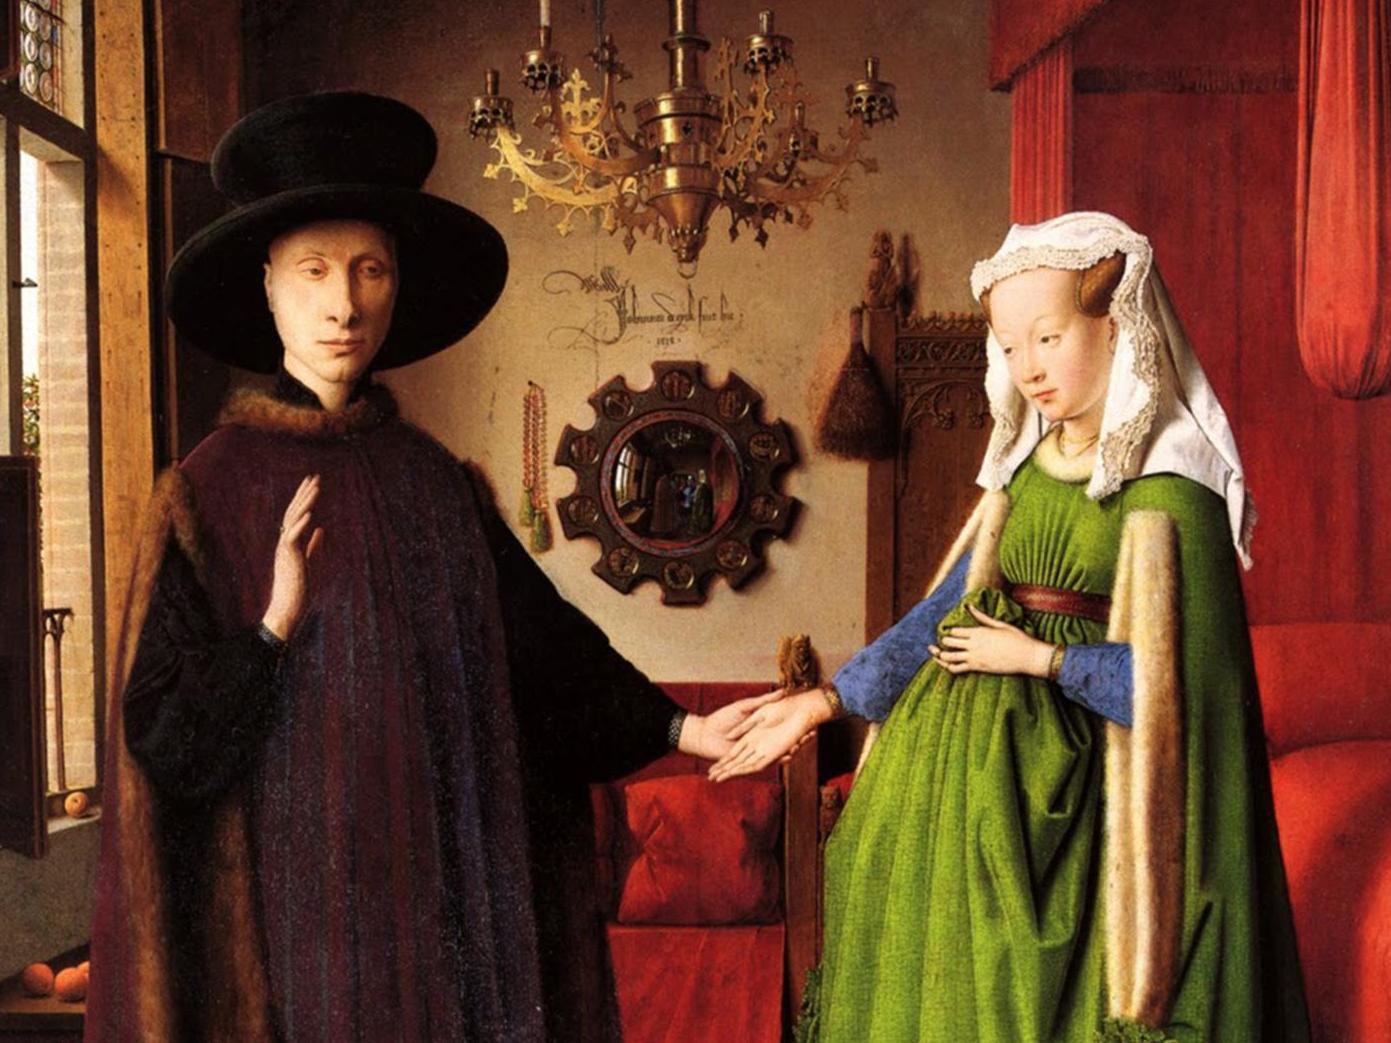 Graffiti artist: the playful inspirer of the Pre-Raphaelites left a message on the wall in this portrait, saying ‘Jan van Eyck was here 1434’